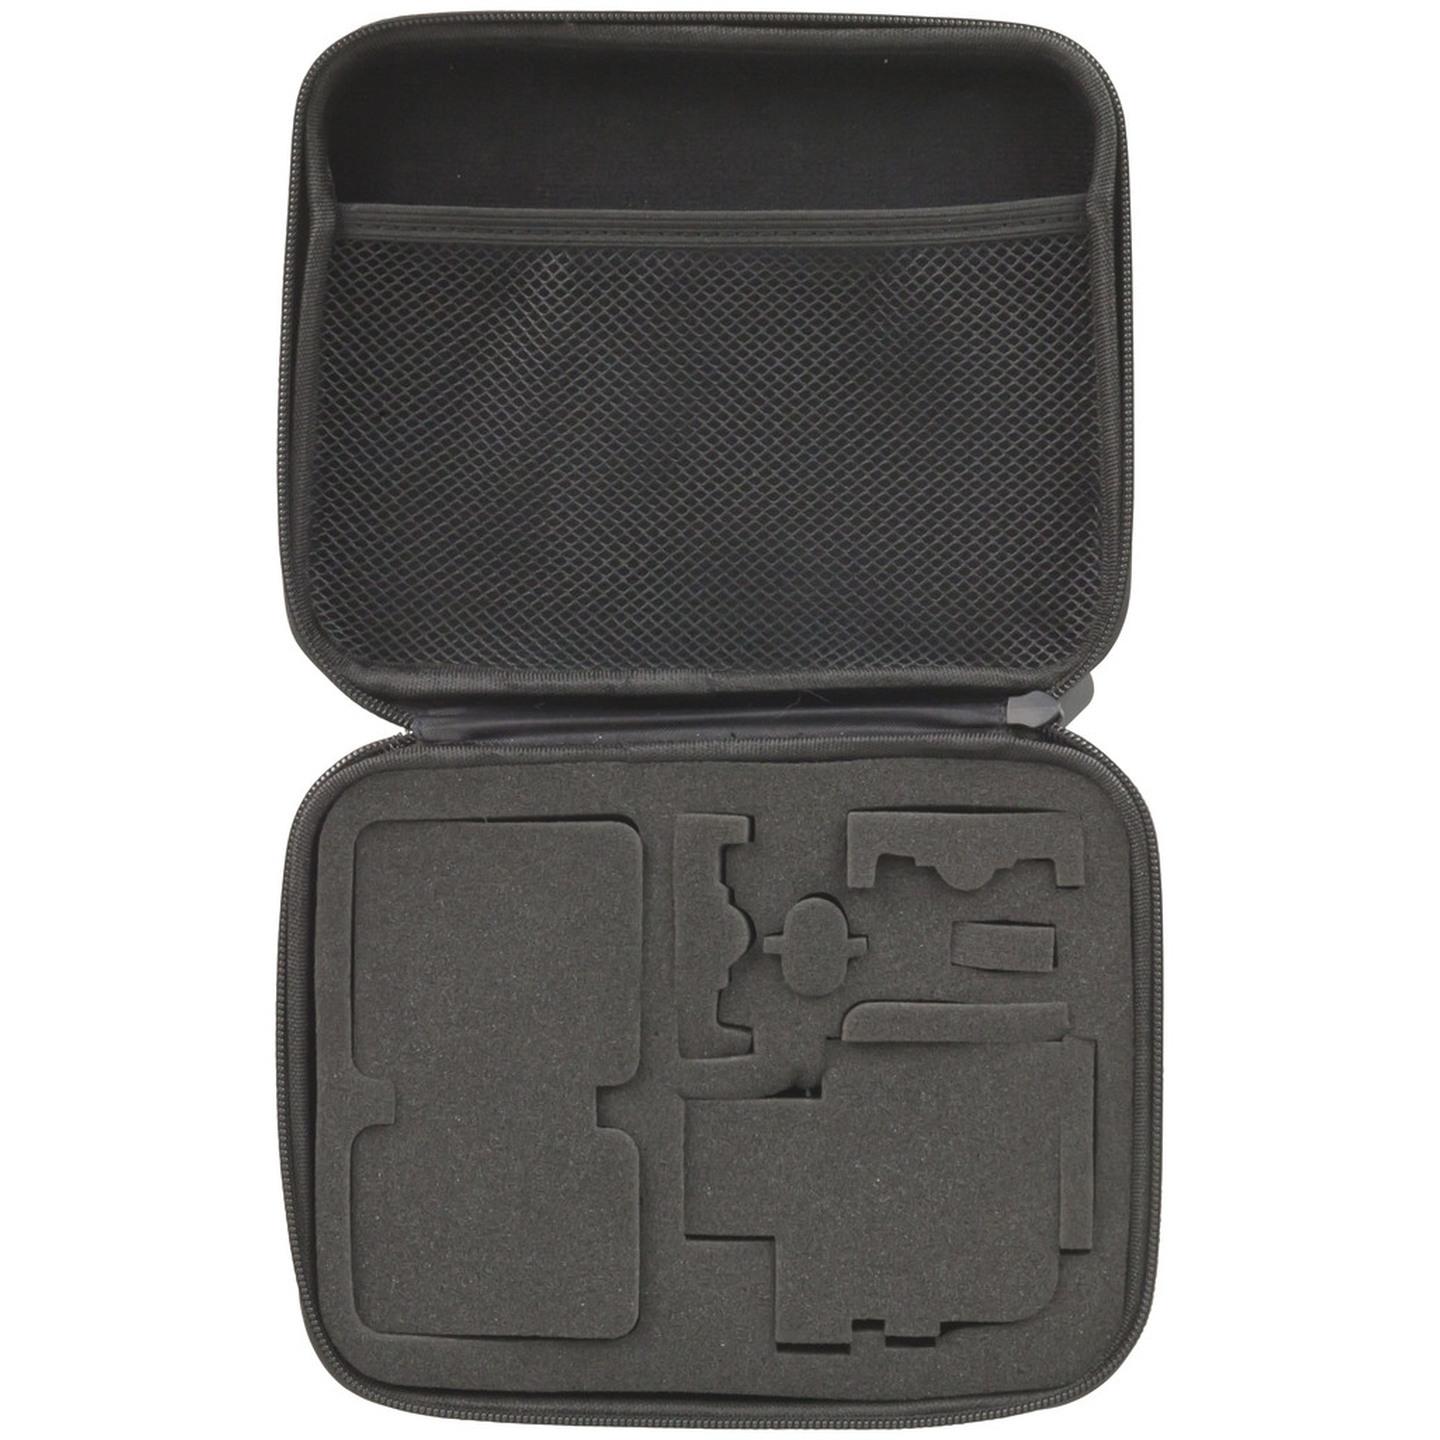 Carry Case for Action Cameras